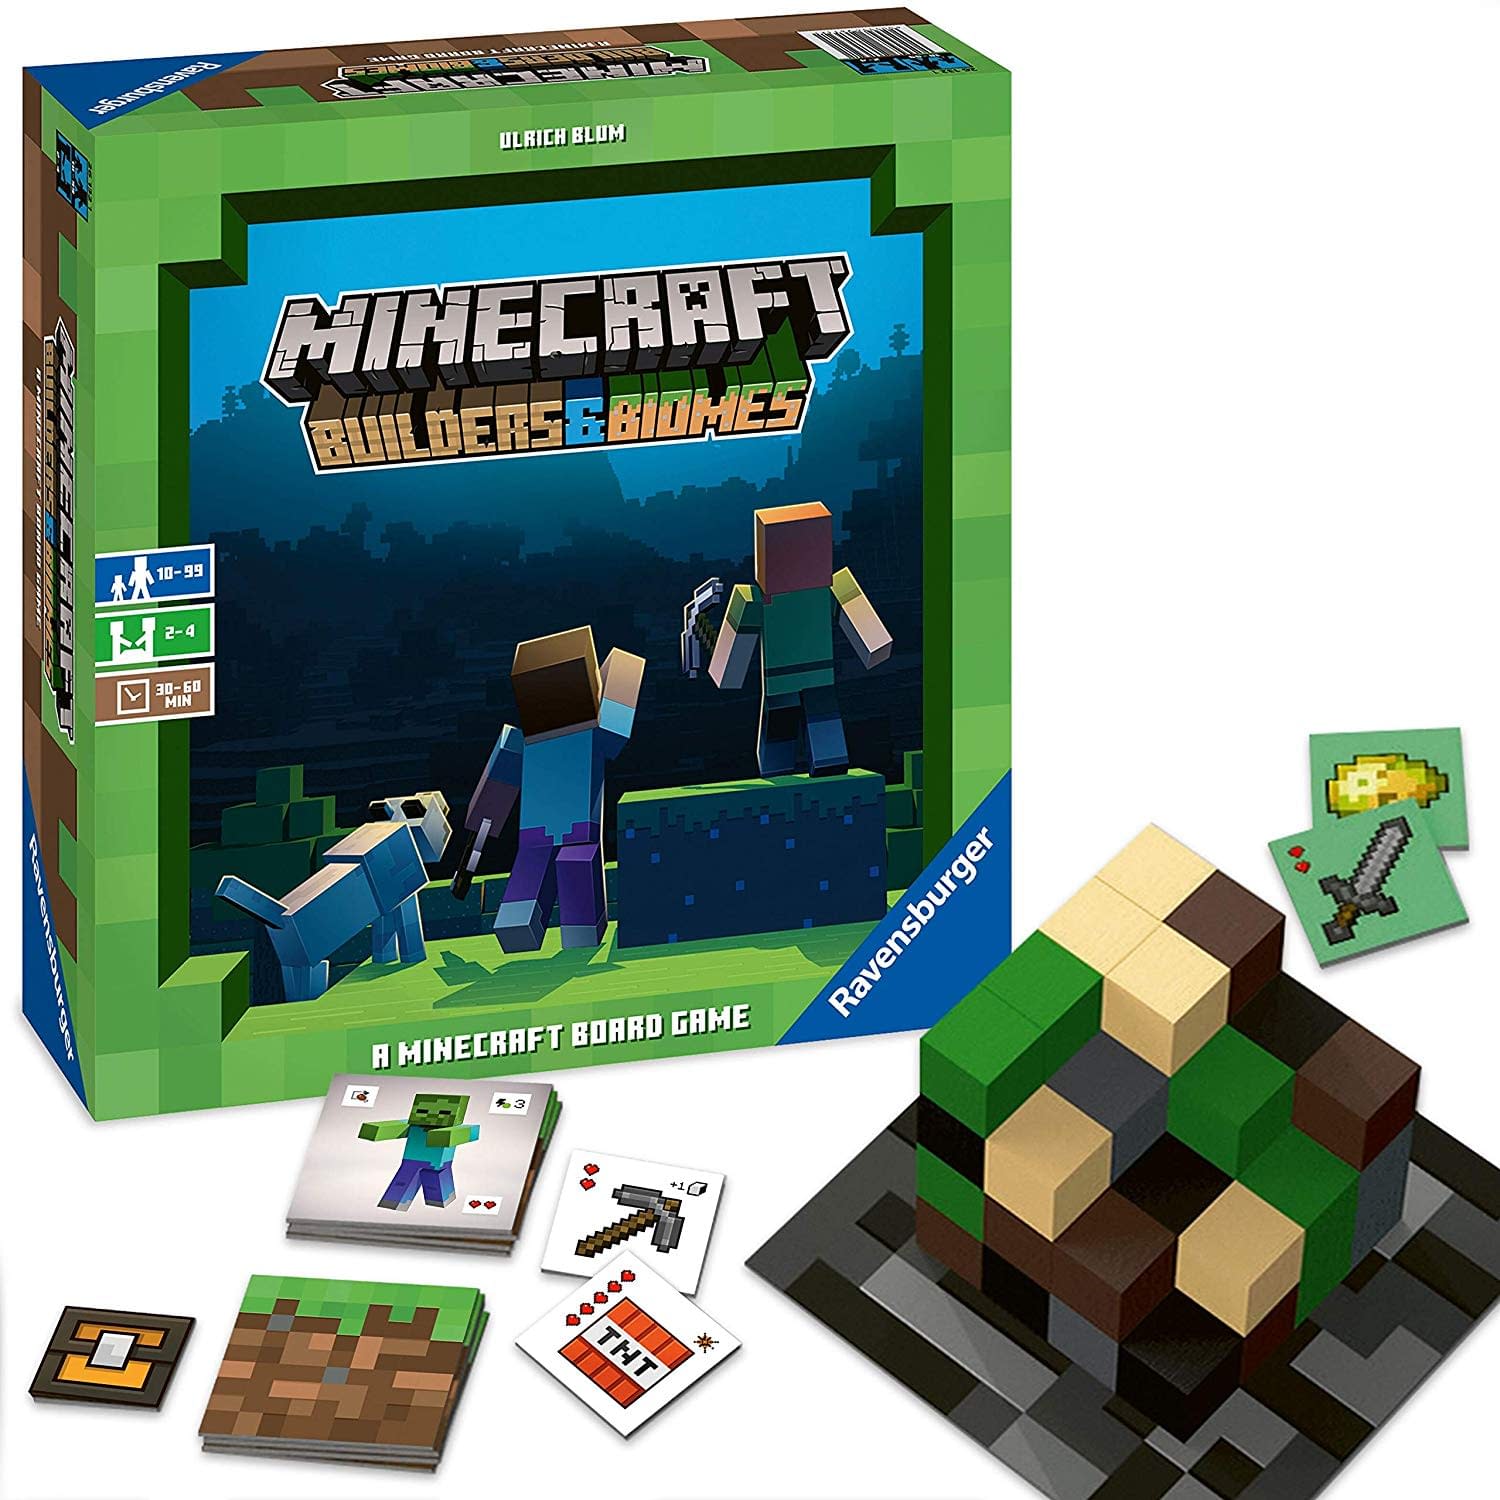 "Minecraft: Builders & Biomes" Brings the Action to (Board Game) Life